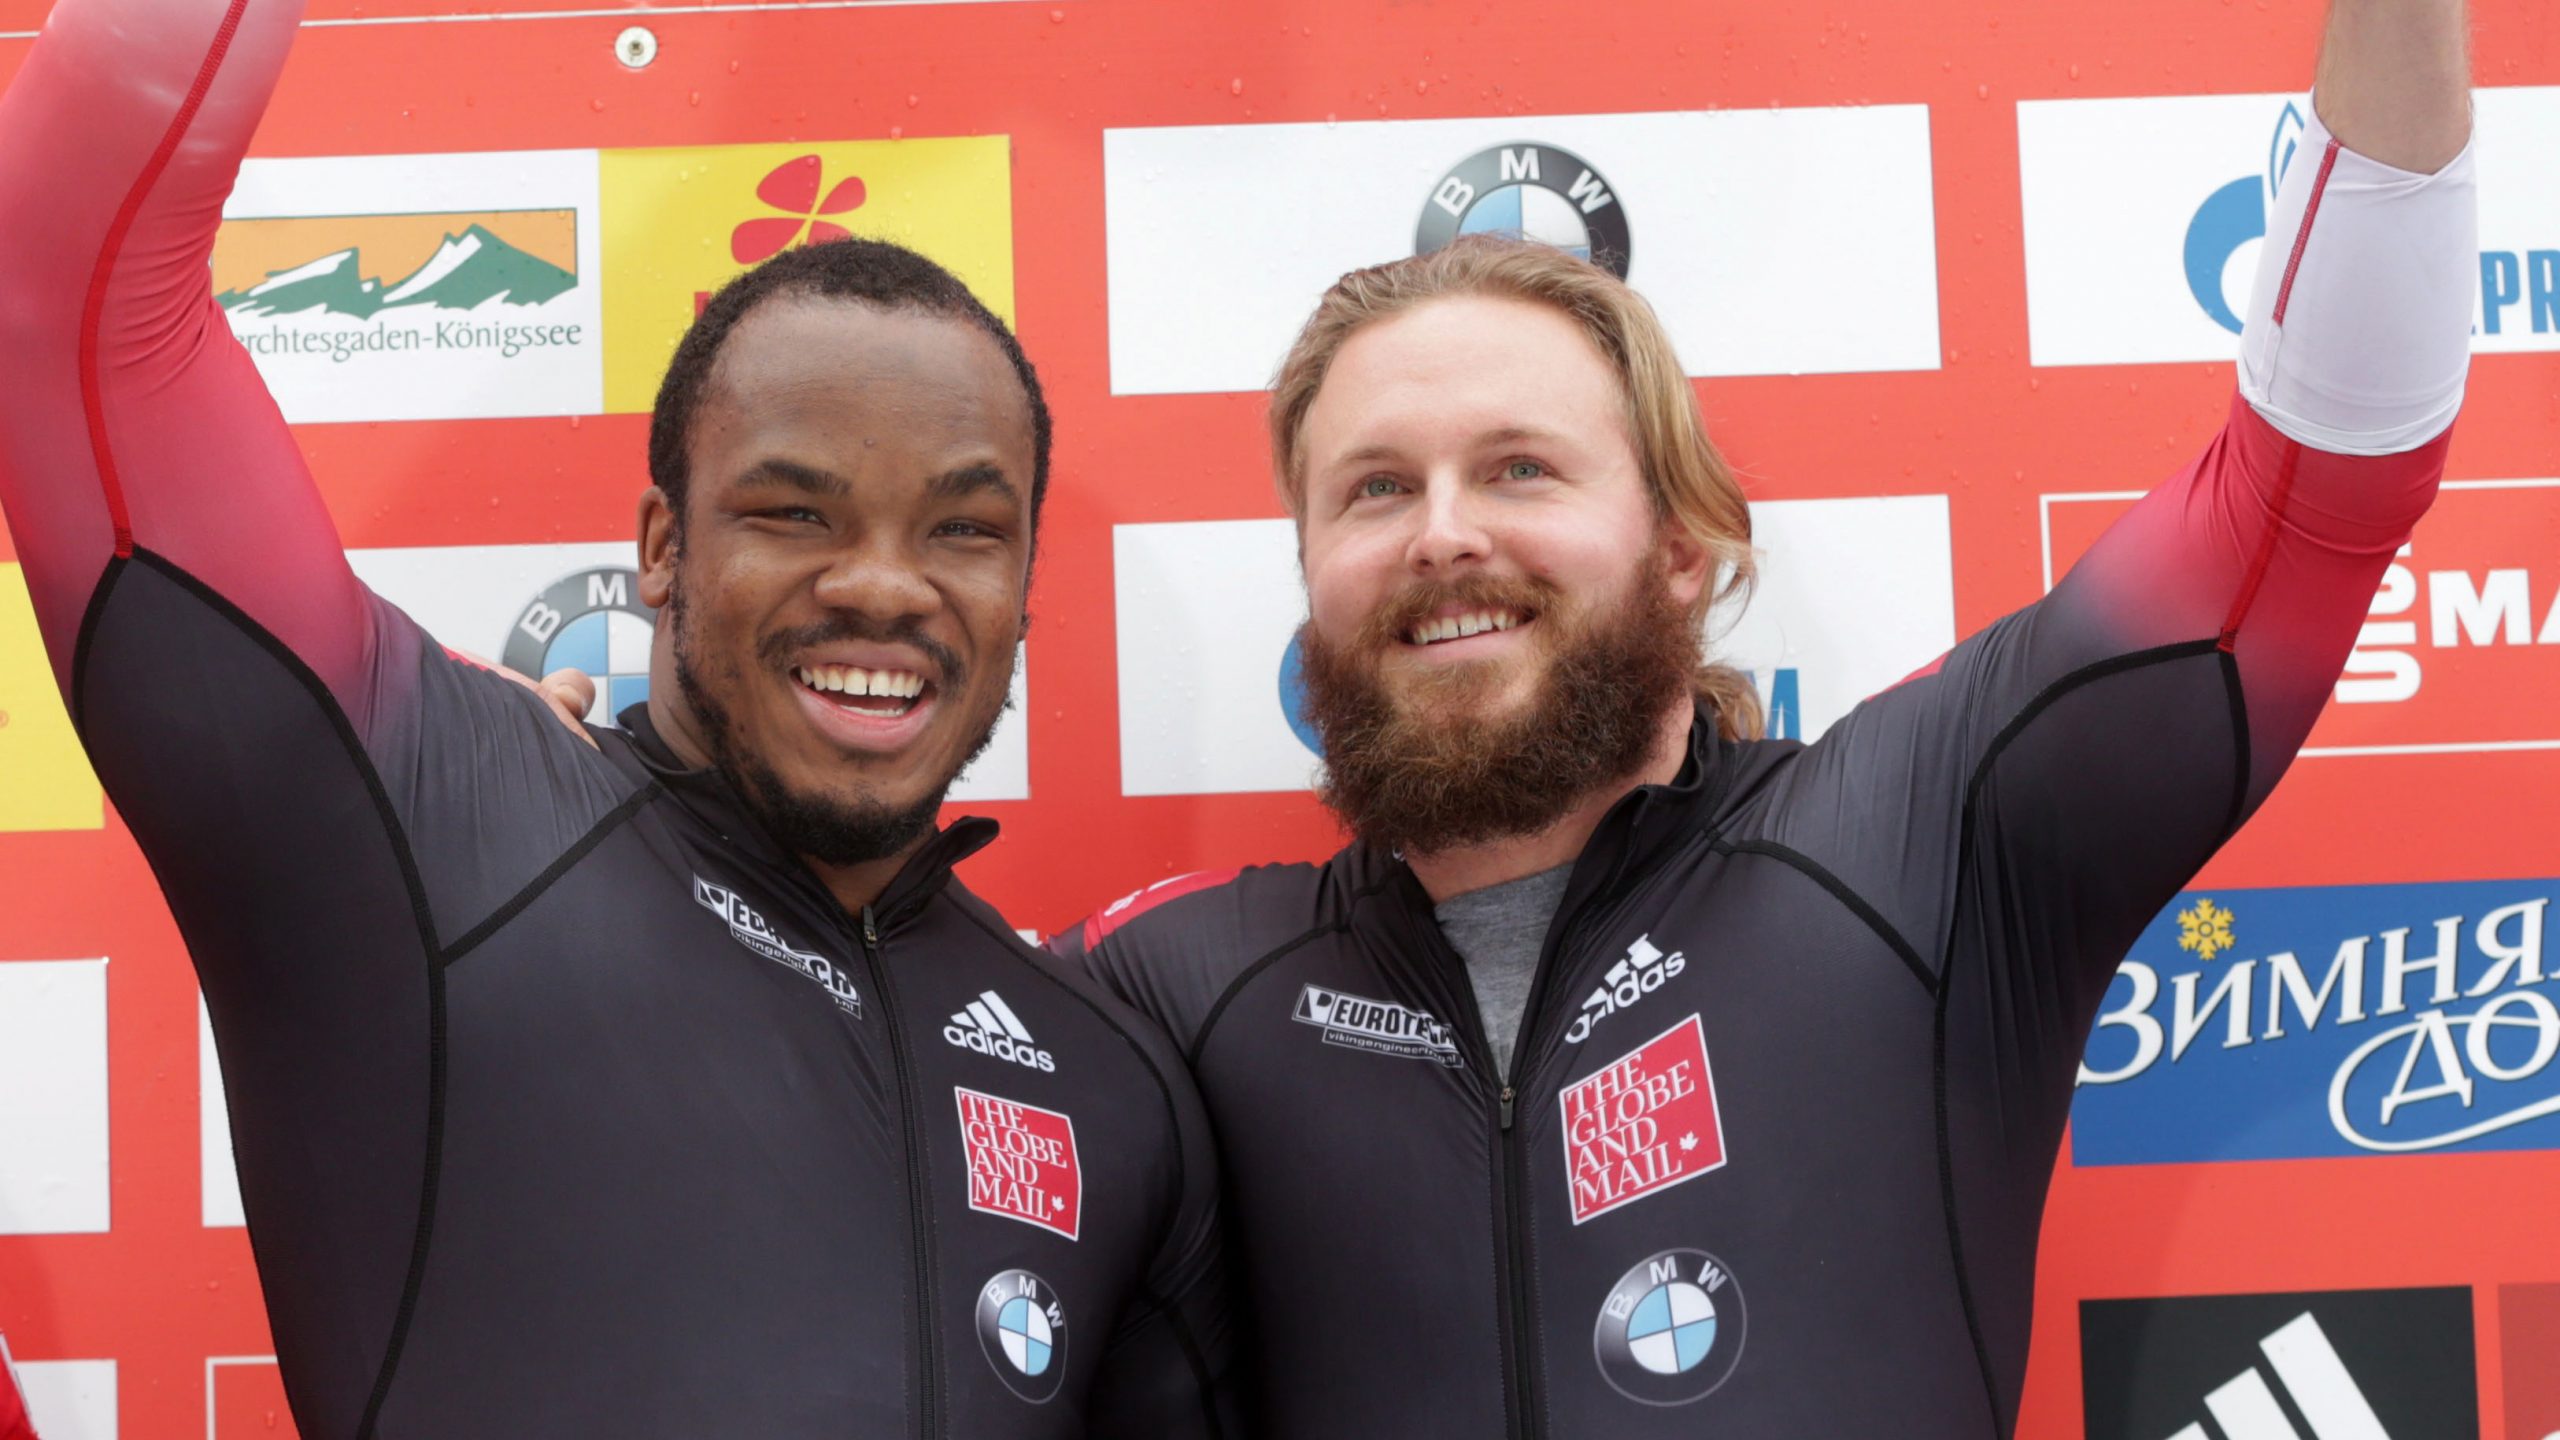 Canada’s Kripps wins bobsled World Cup finale